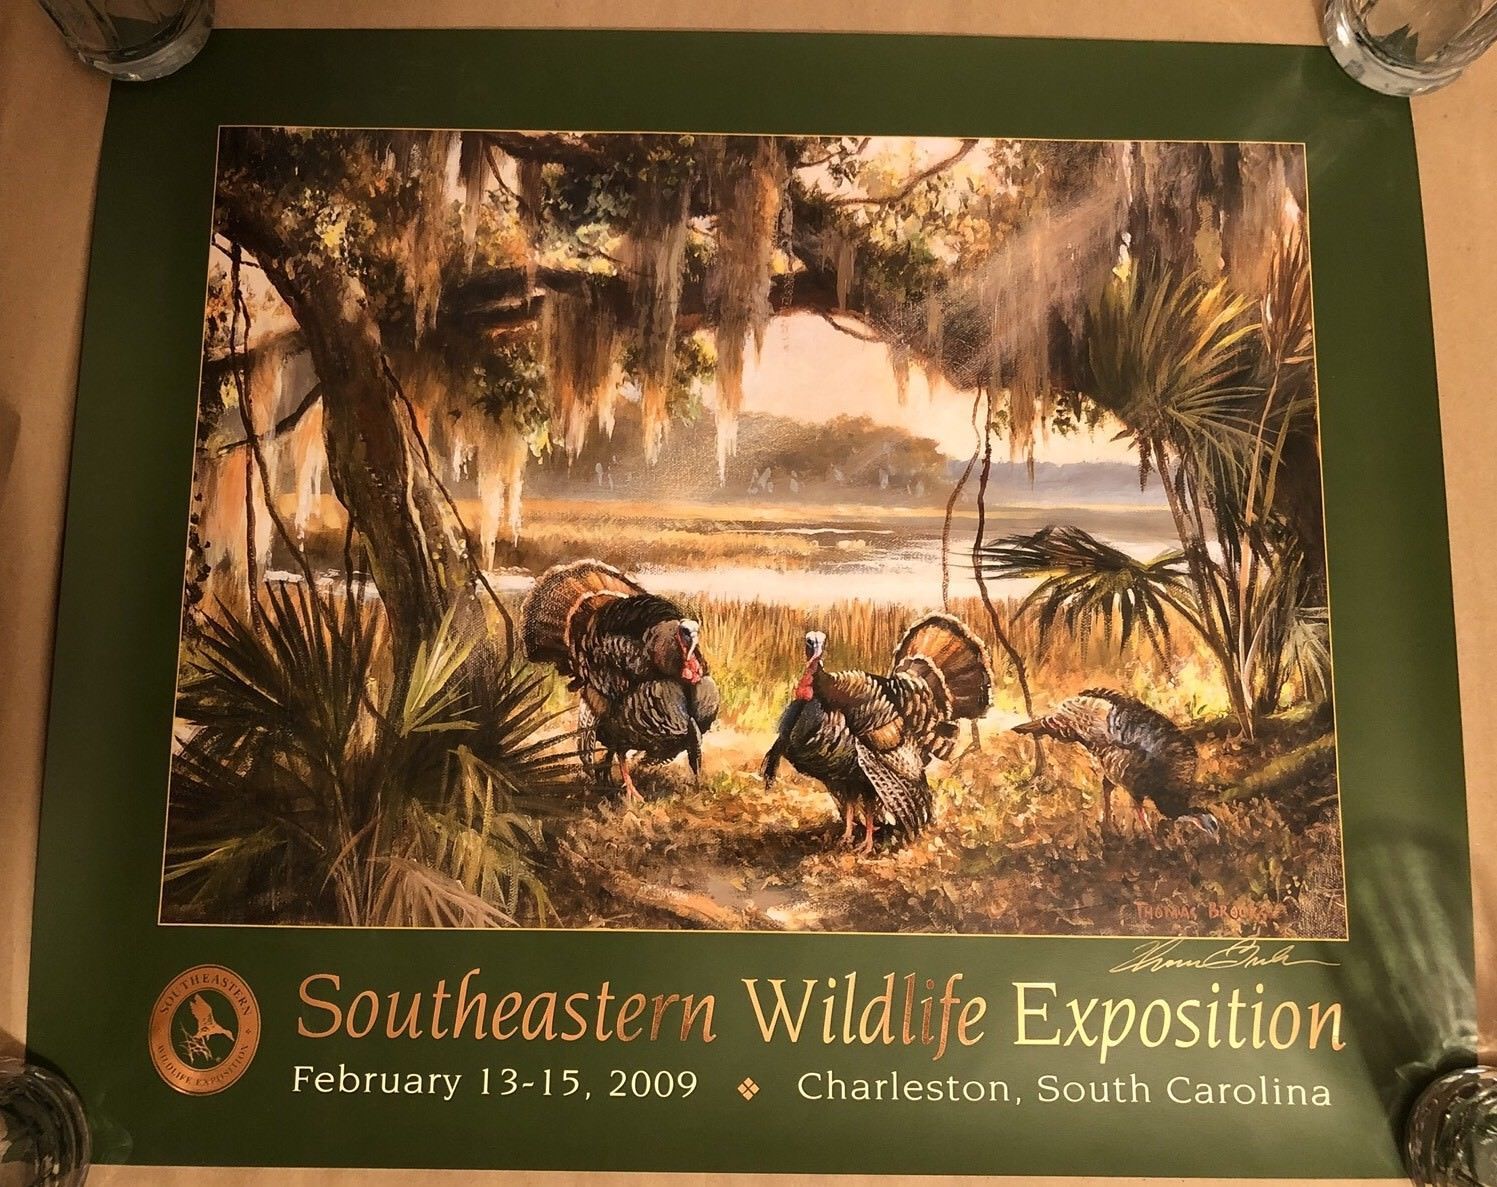 2009 SOUTHEASTERN WILDLIFE EXPOSITION Signed Poster 20x24 Thomas Brooks